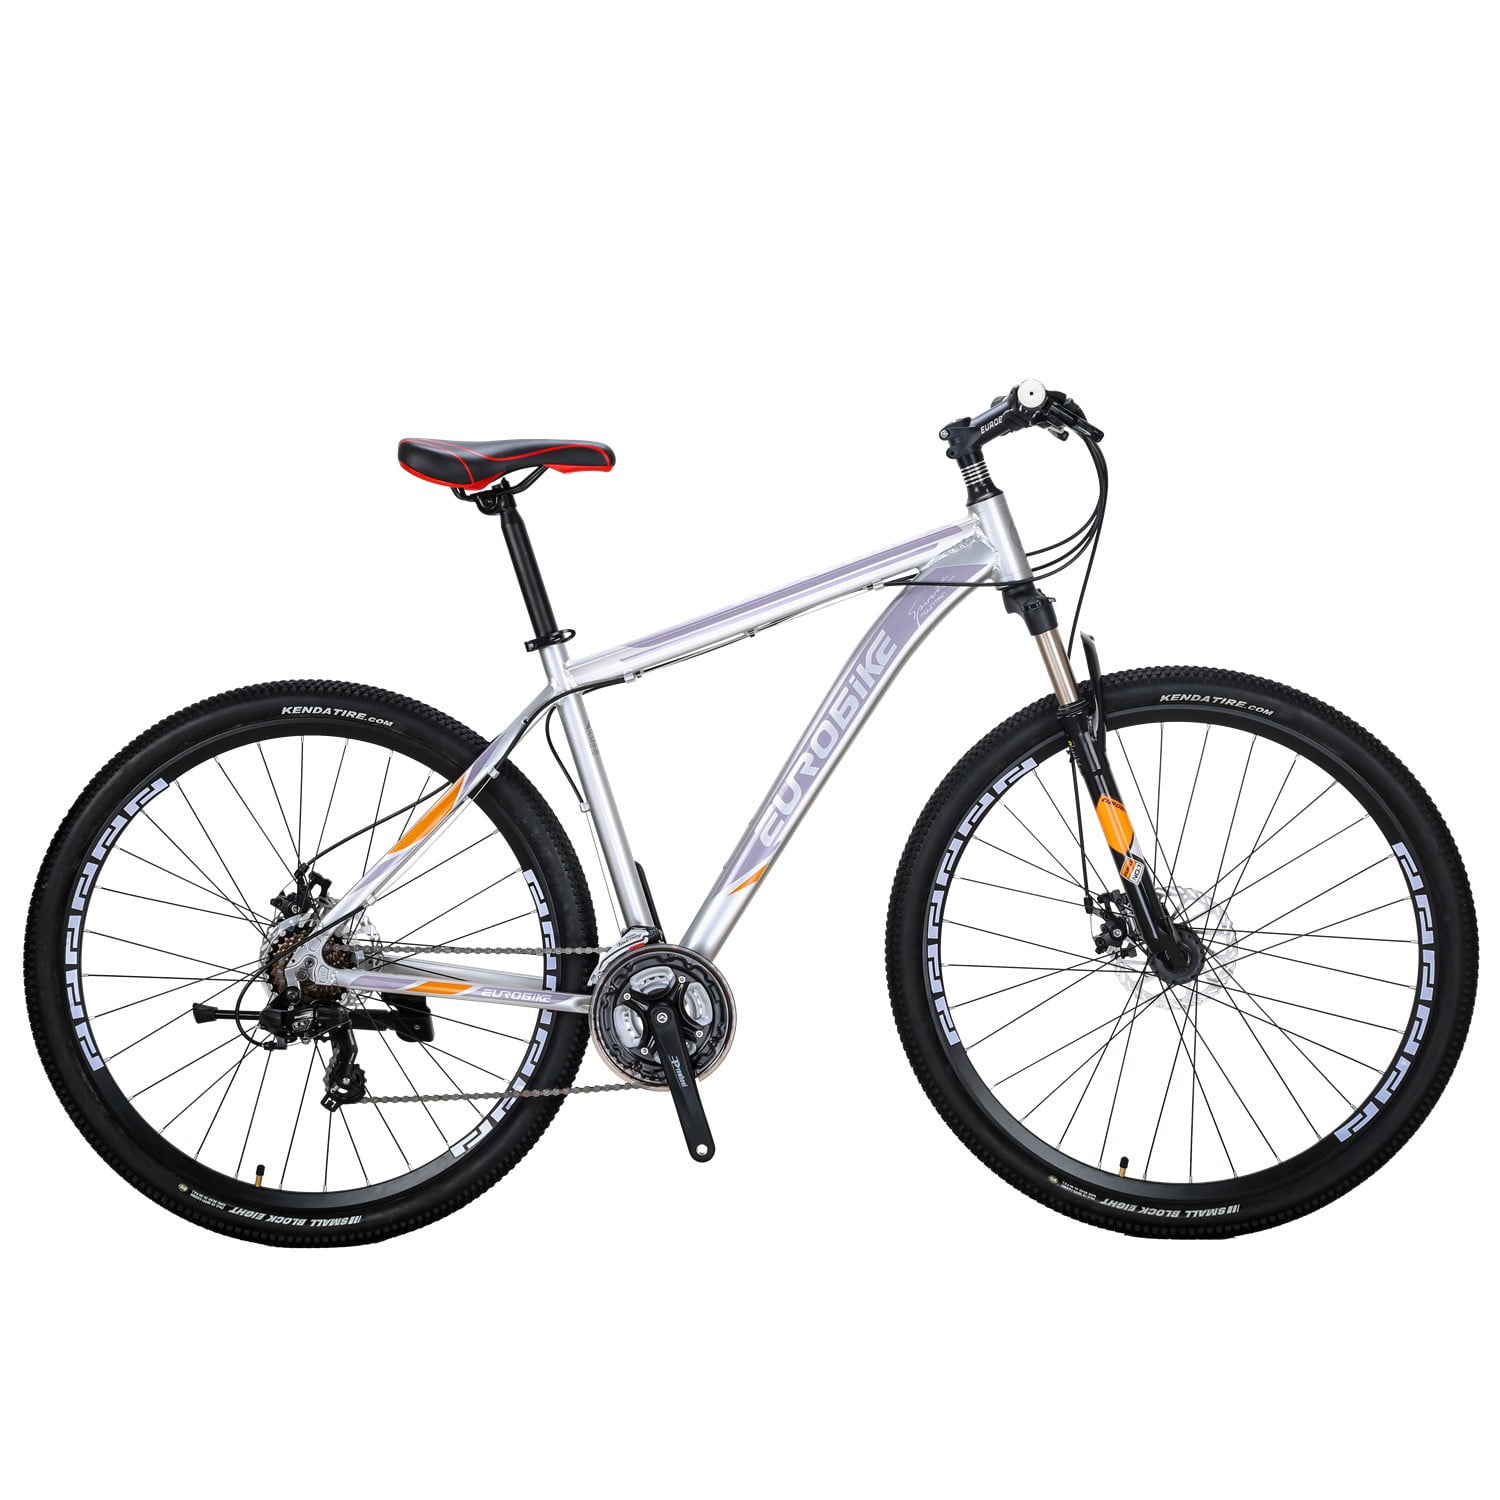 Eurobike X9 29inch Aluminum Frame Mountain Bike 21 Speed Front Suspension Bicycle Disc Brakes for Men Adults Silver